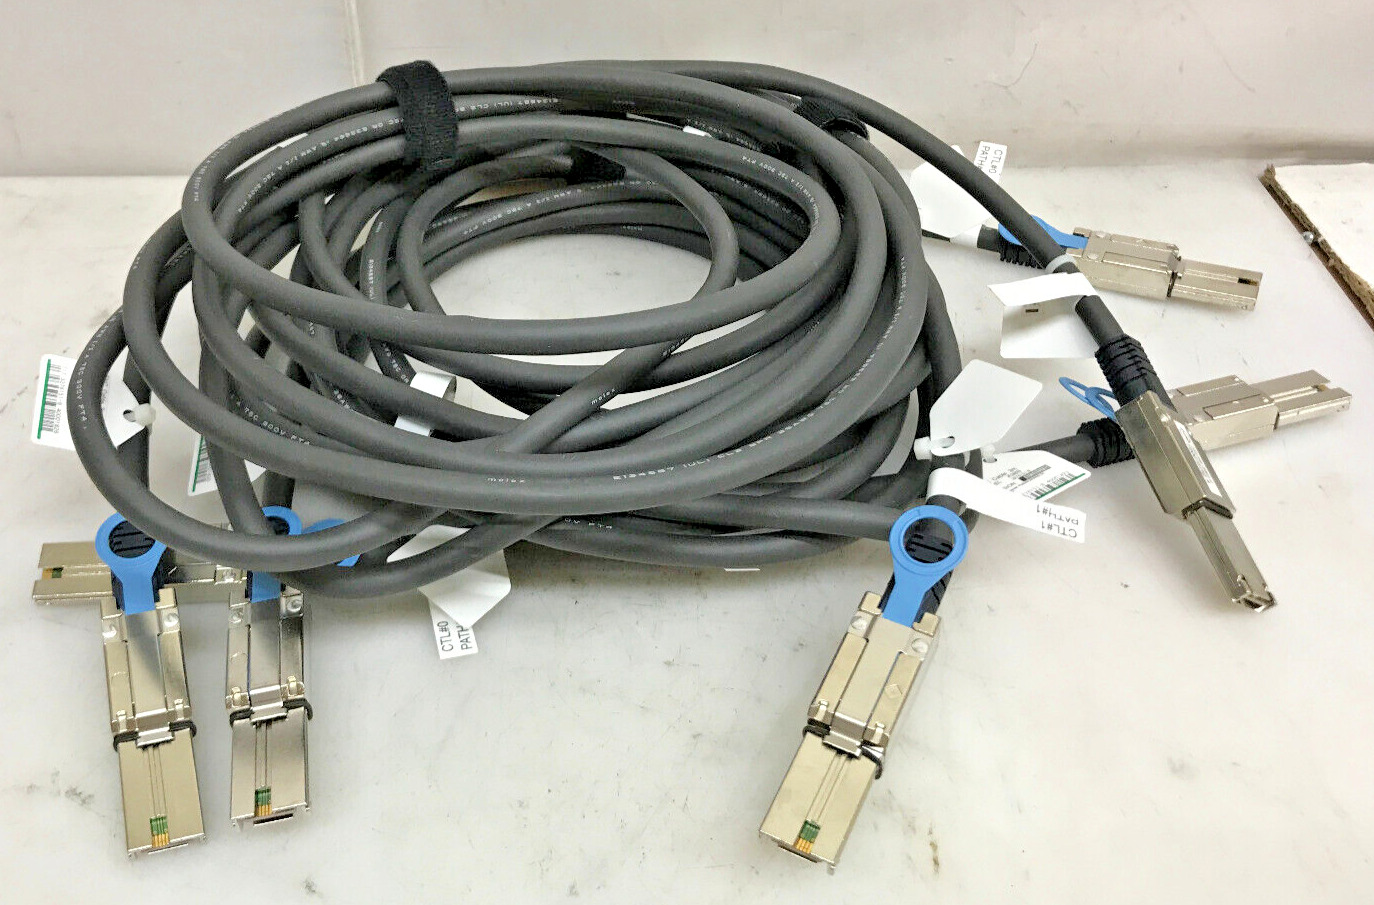 Lot of 4 Hitachi 3276151-B K3BS DF-F800-K3BS DATA Transfer Cable Cable 3m